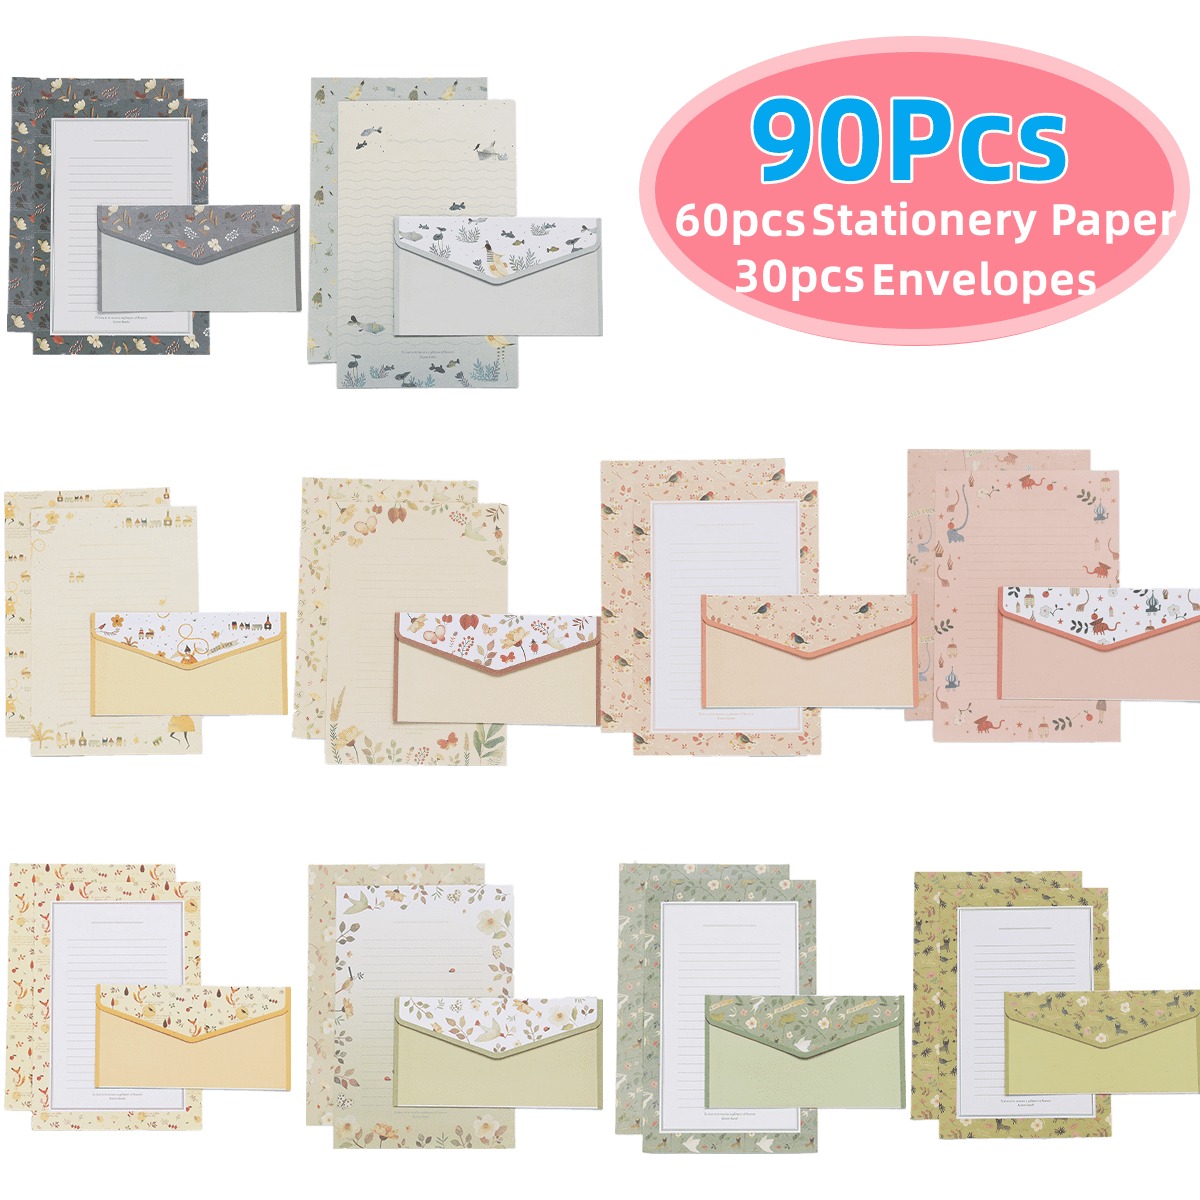 Stationary Paper and Envelopes Set, 90 PCS Stationary Set for Women Girls  and Men Boys Cute Stationary Writing Stationery Paper with 30 Envelope - 60